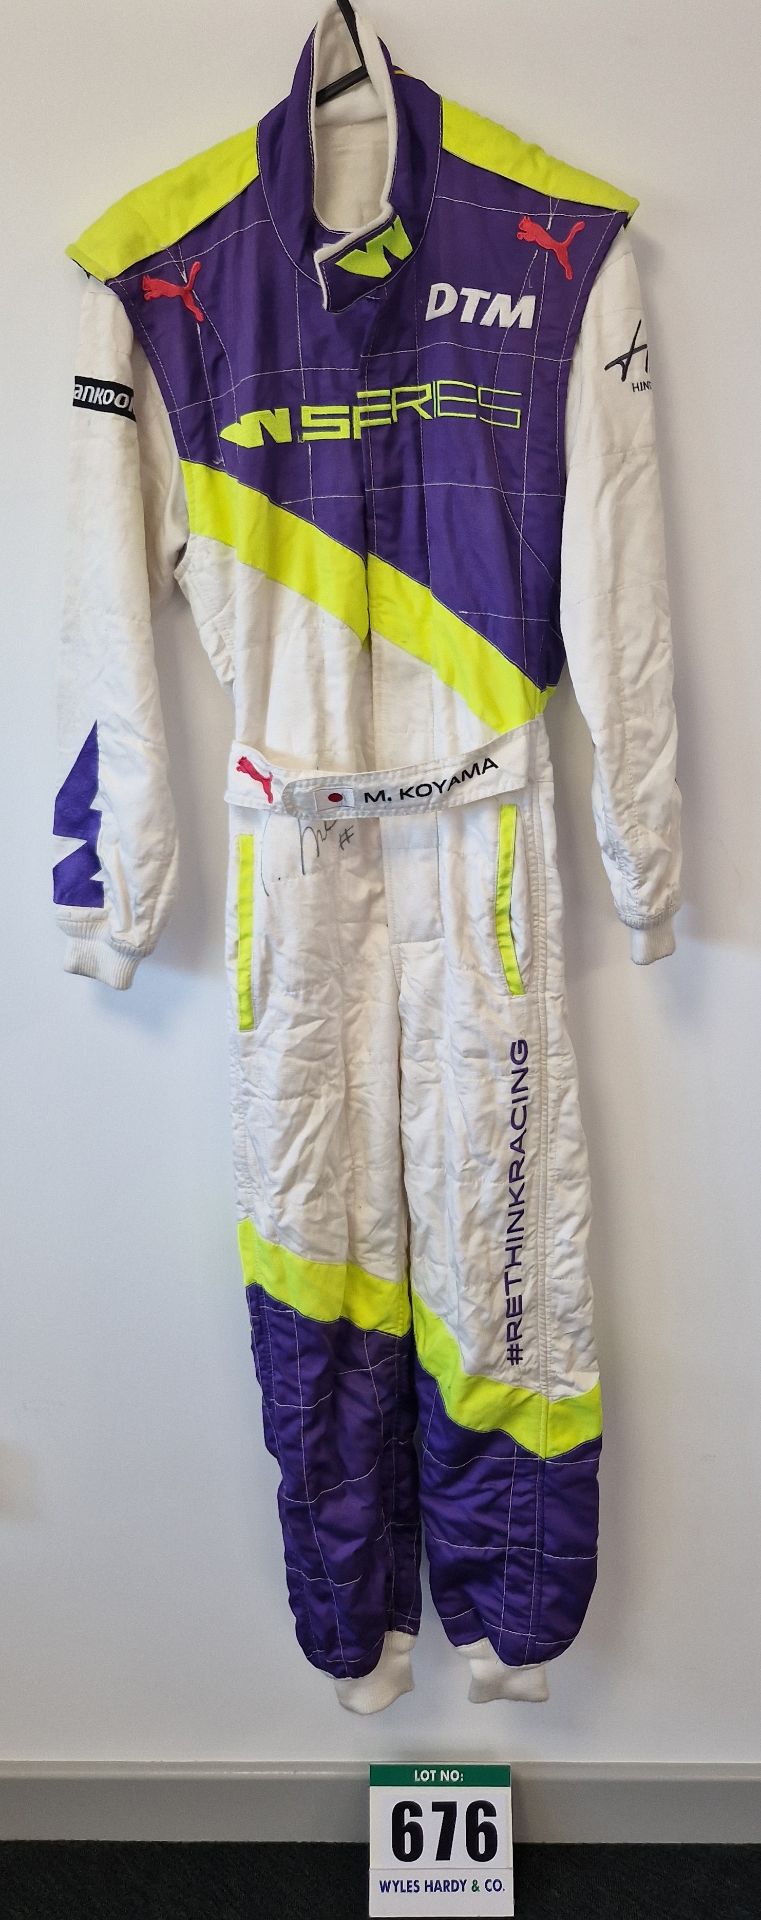 One PUMA FIA approved Race Suit (Size 44) worn by Miki Koyama and signed by her